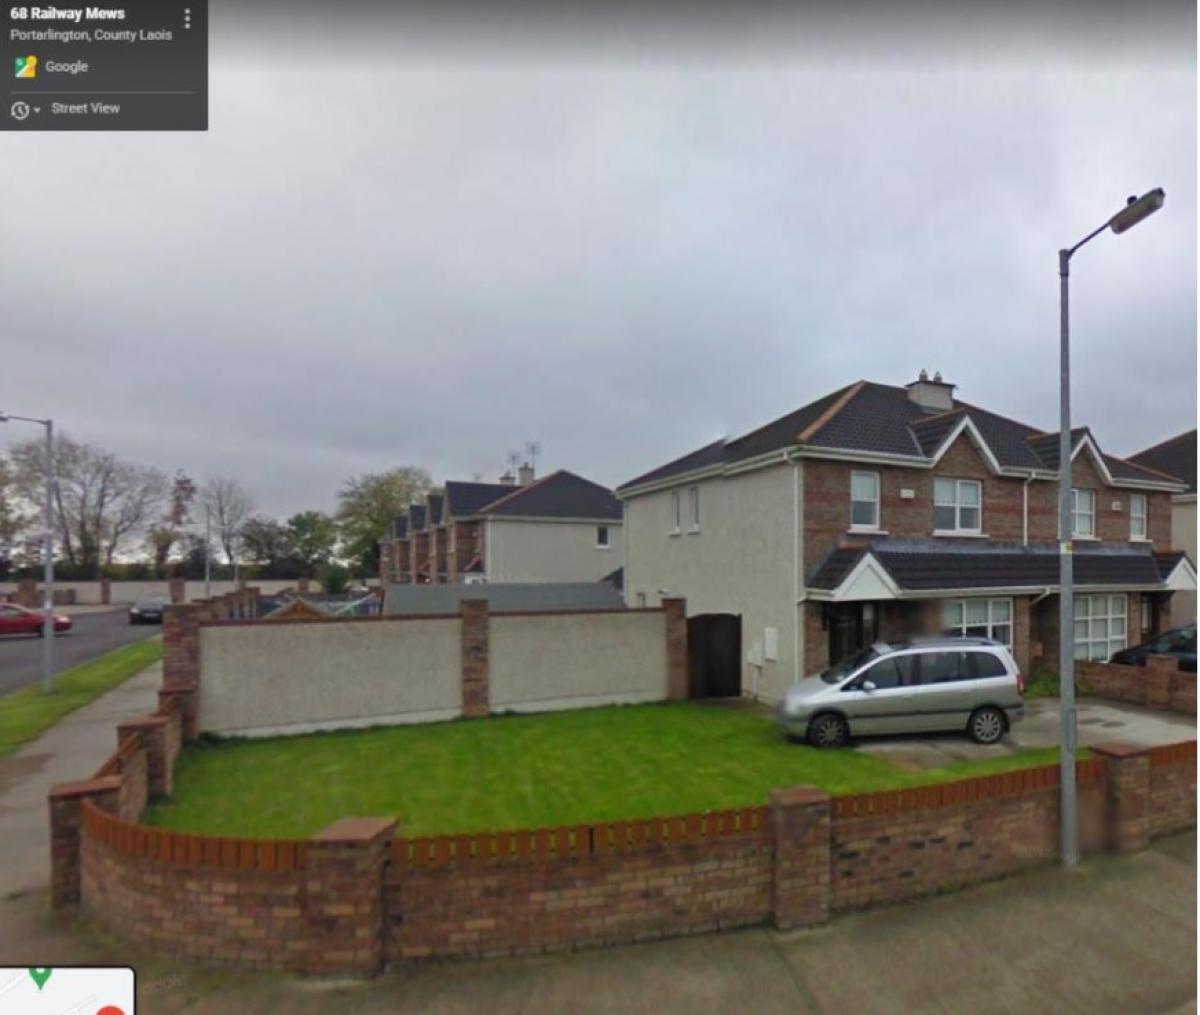 Picture of Home For Sale in Portarlington, Laois, Ireland